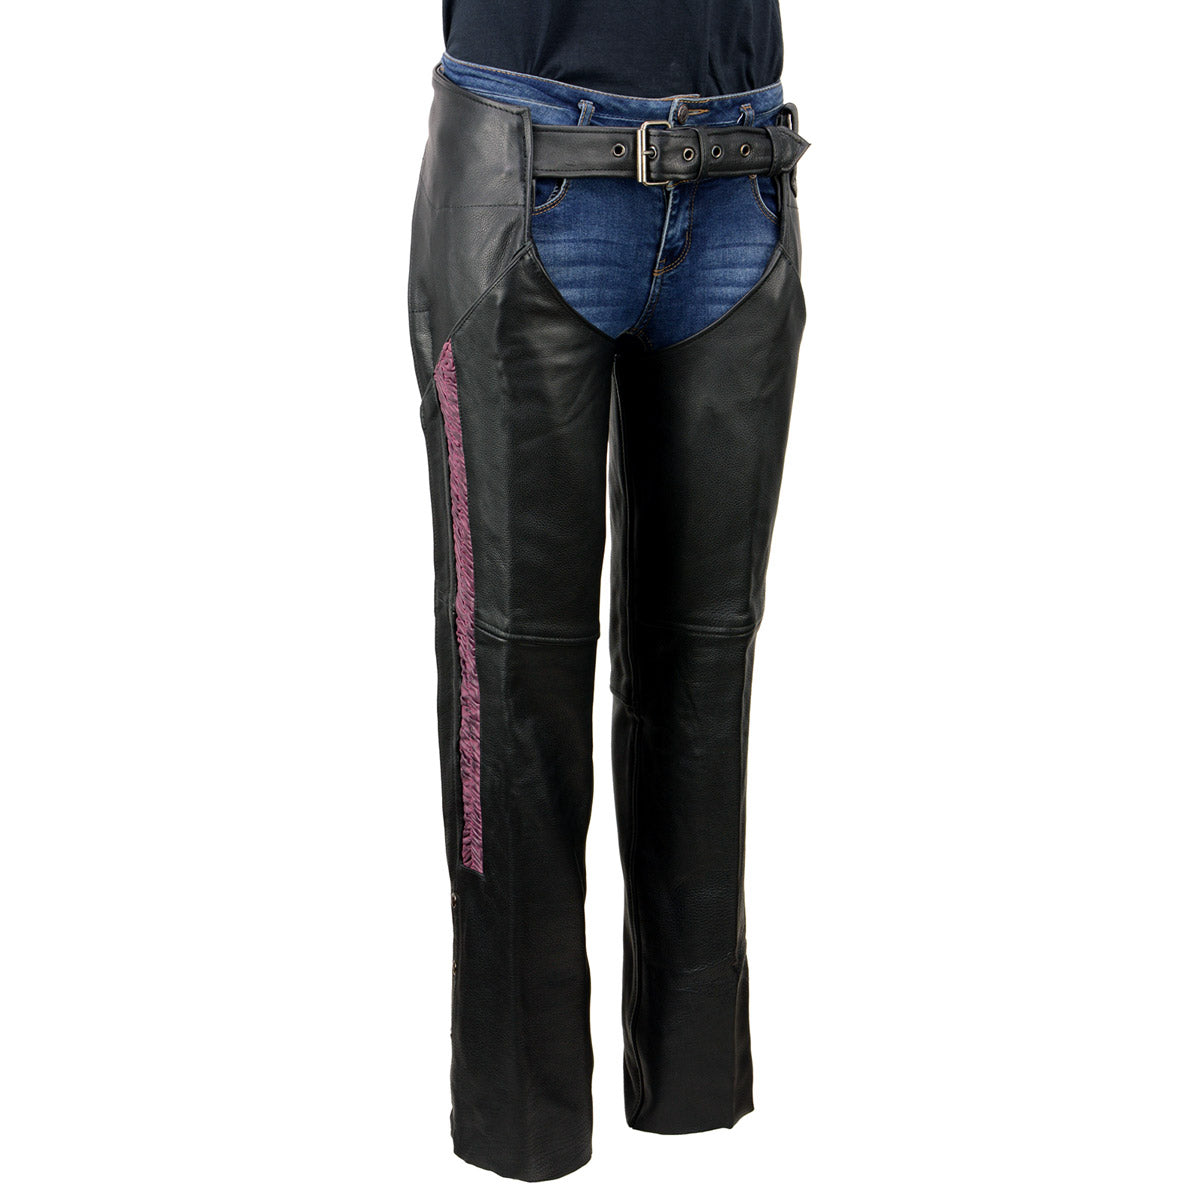 Milwaukee Leather Chaps for Women Black Naked Skin Purple Crinkled Stripes- Reflective Trim Motorcycle Chap MLL6500